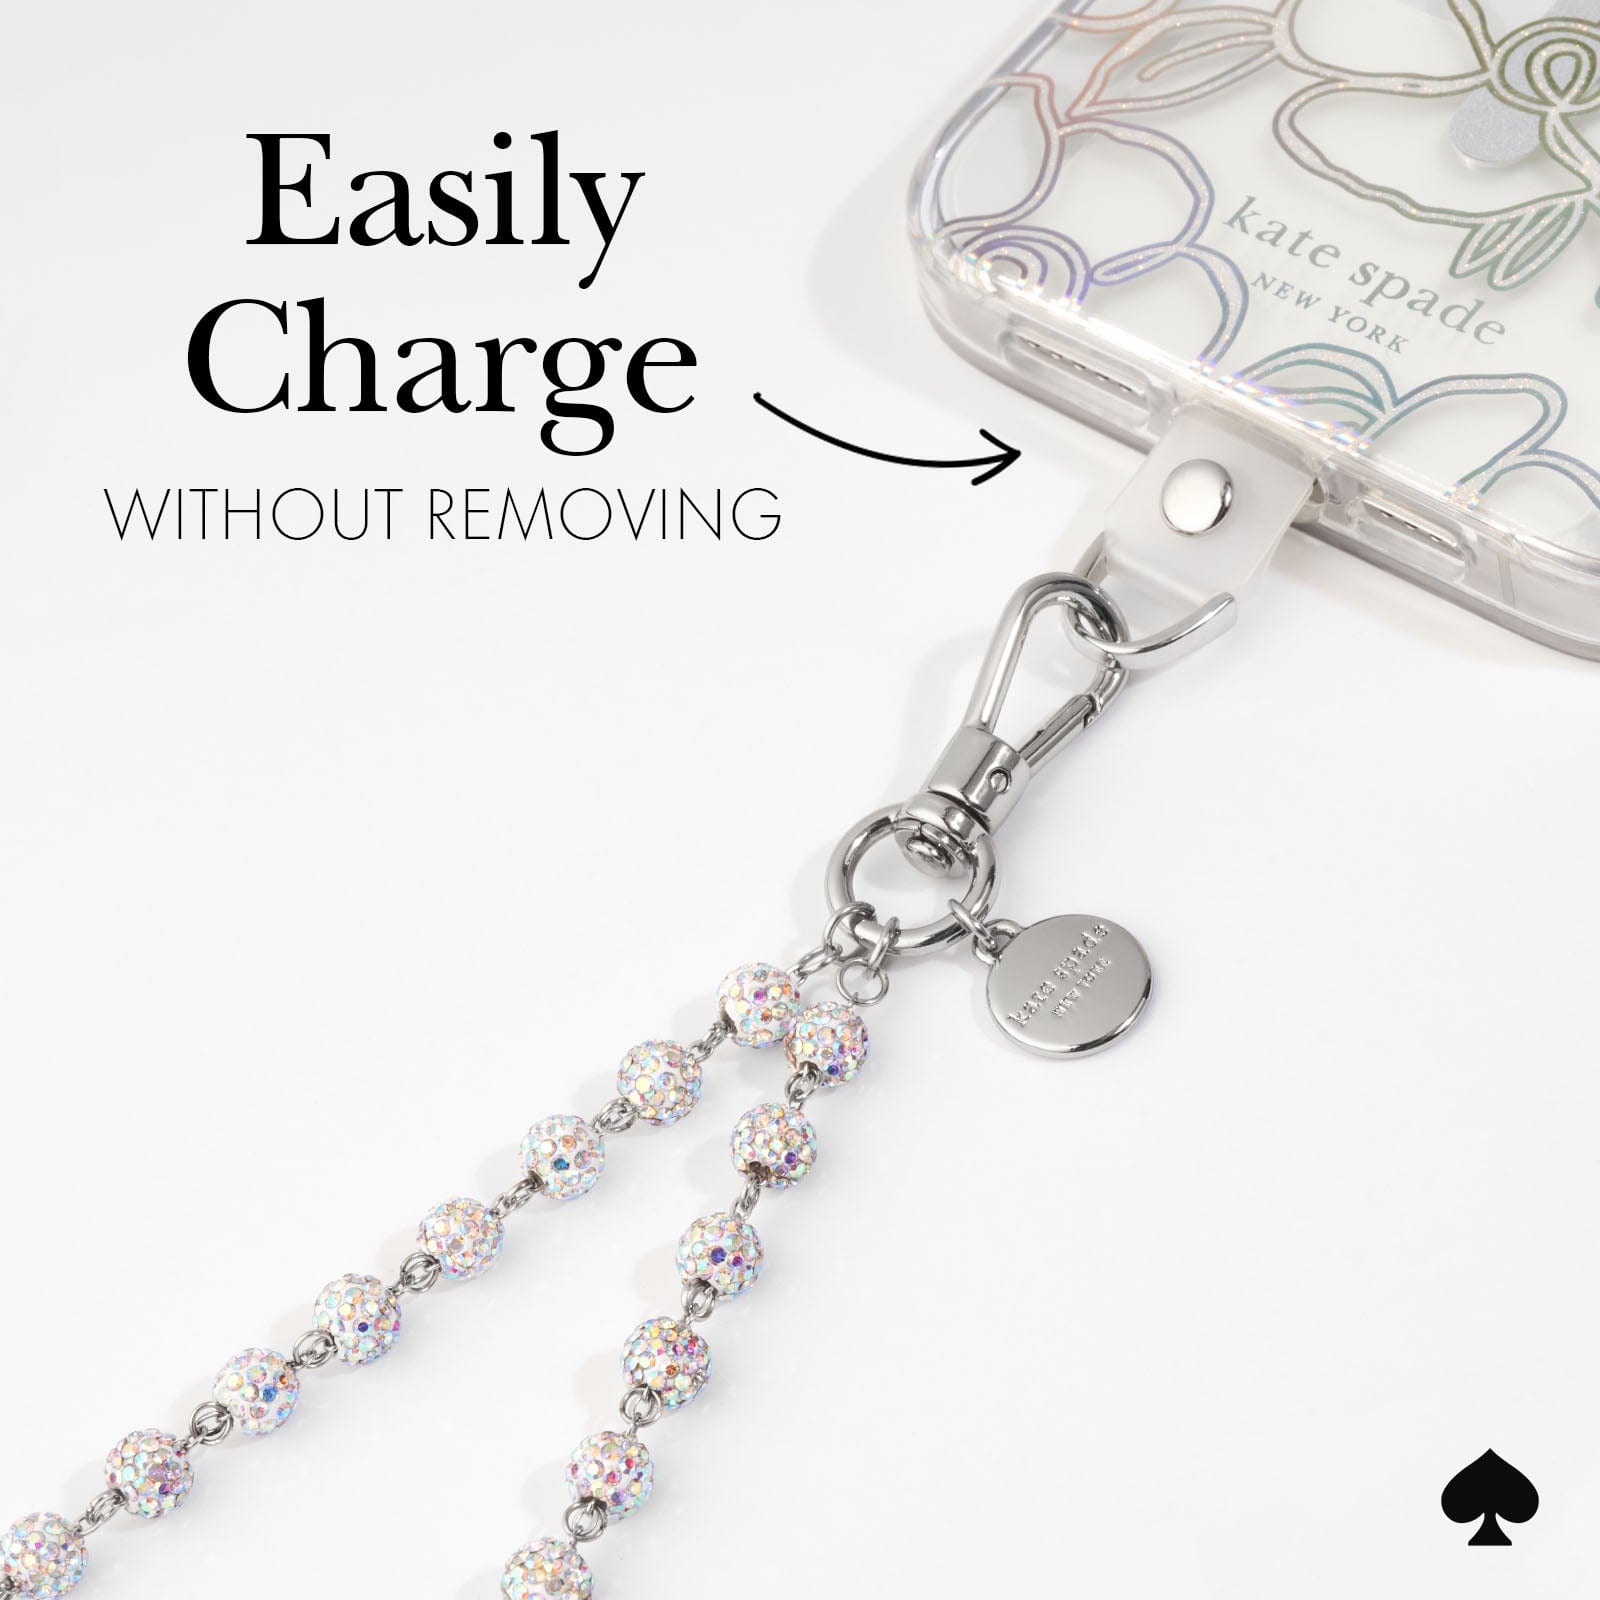 EAILY CHARGE WITHOUT REMOVING